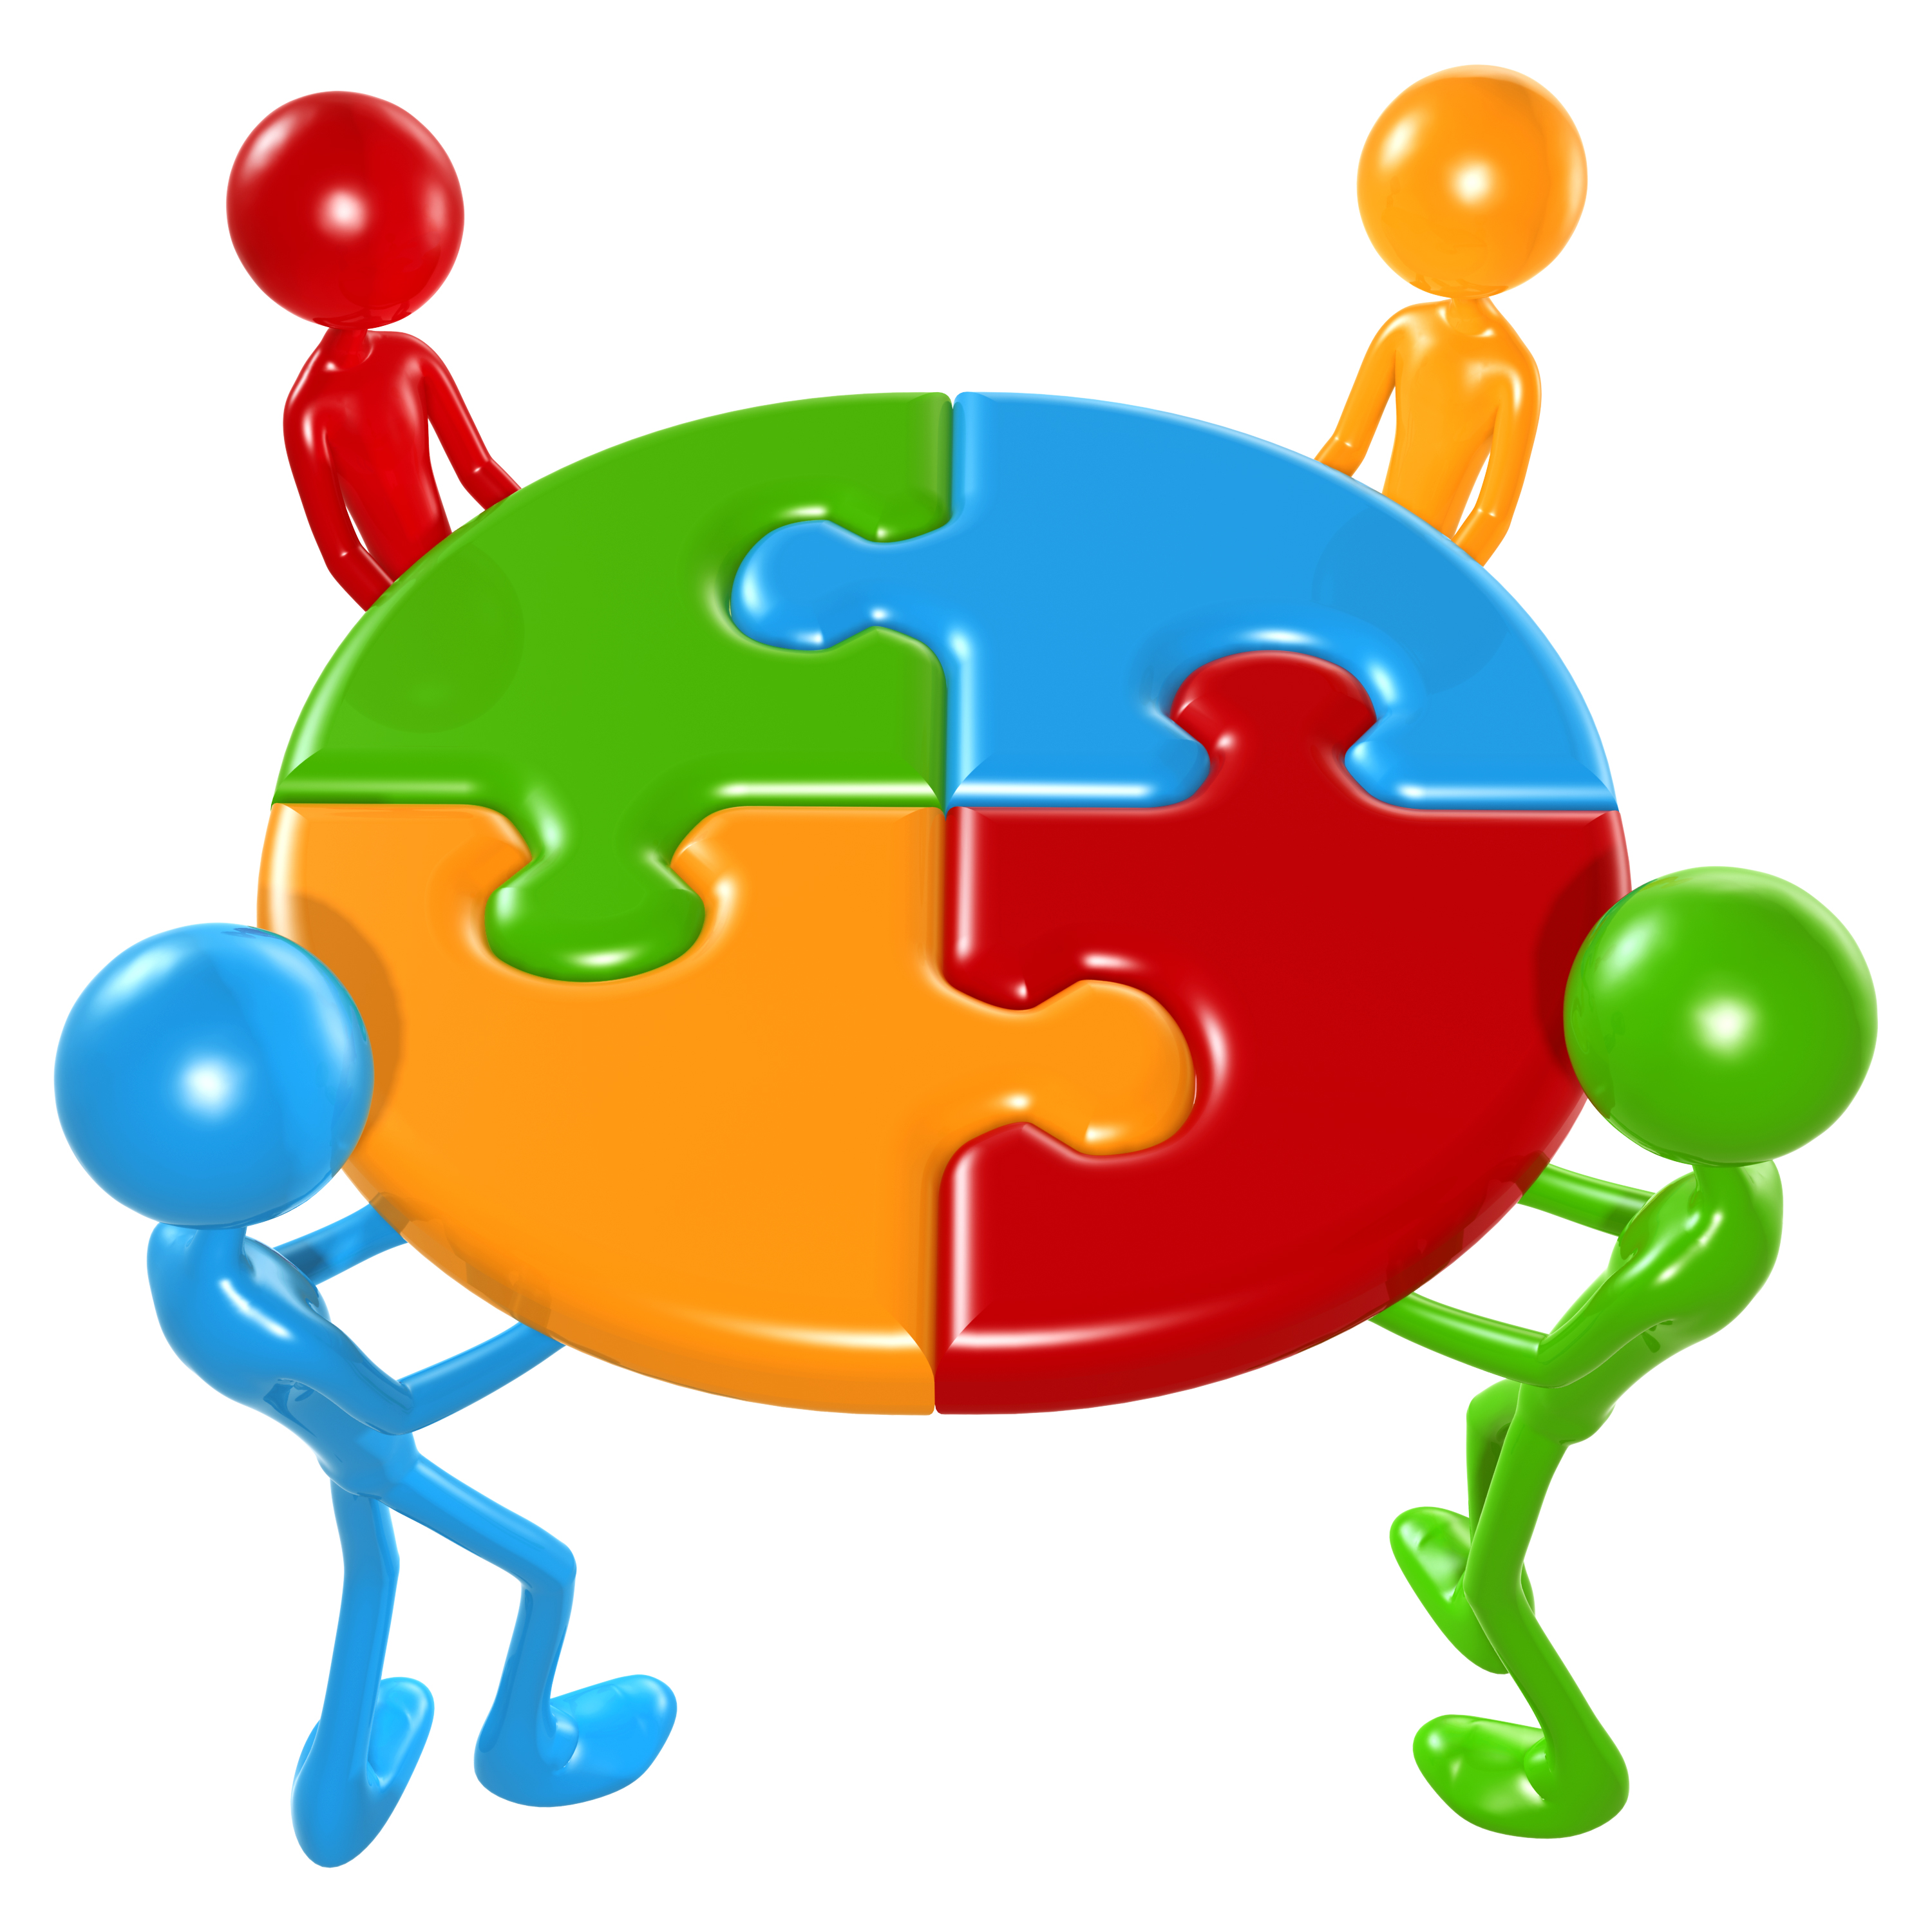 free clipart images for teamwork - photo #6